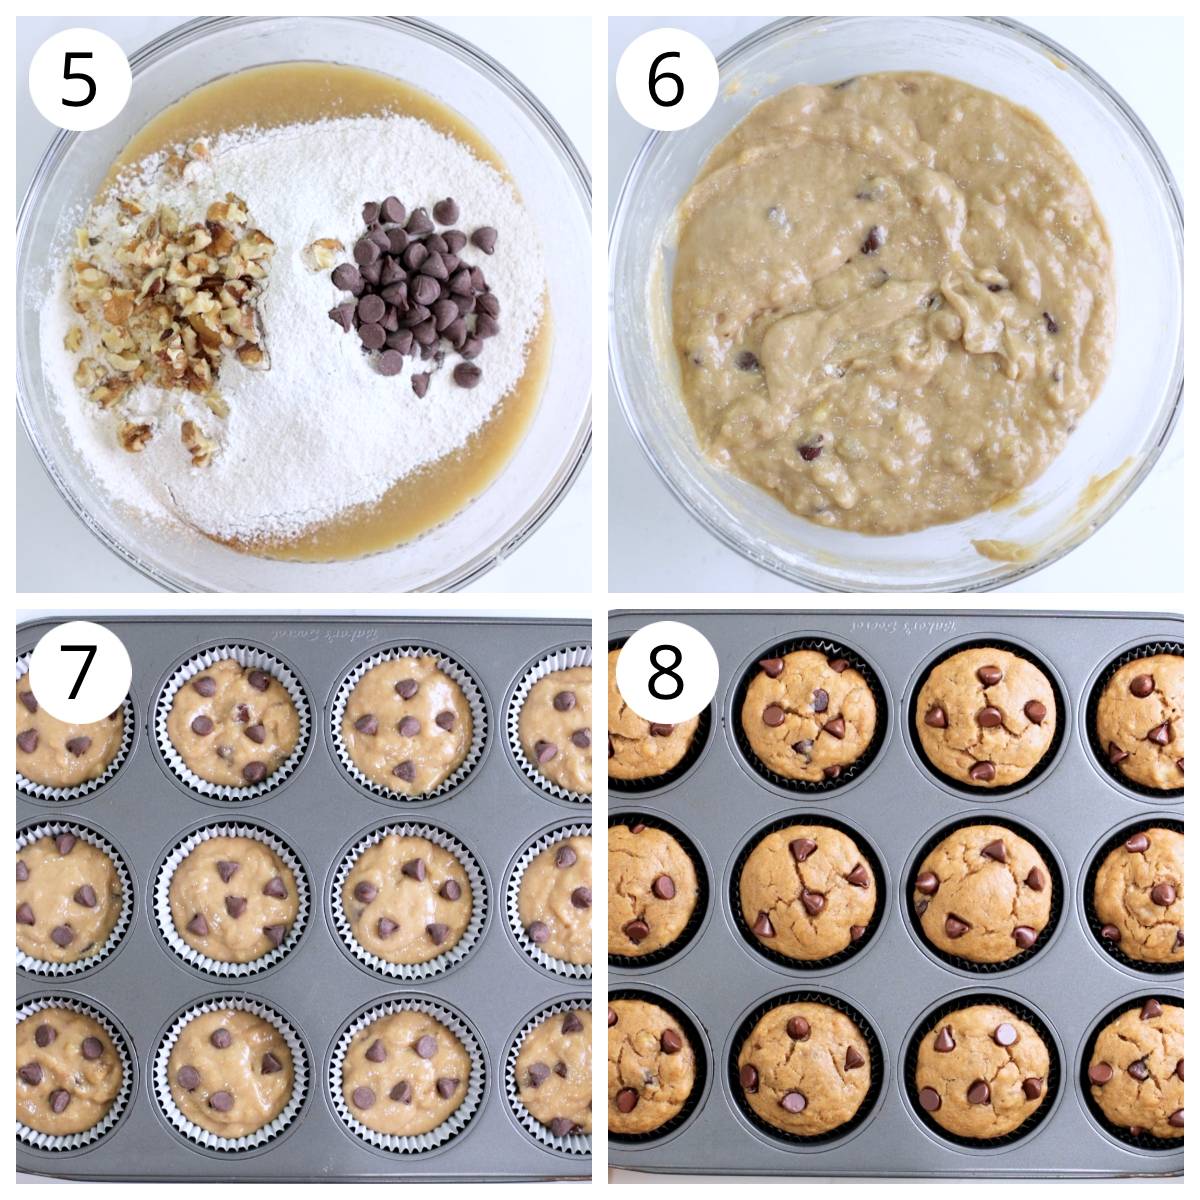 Steps for baking banana chocolate chip muffins